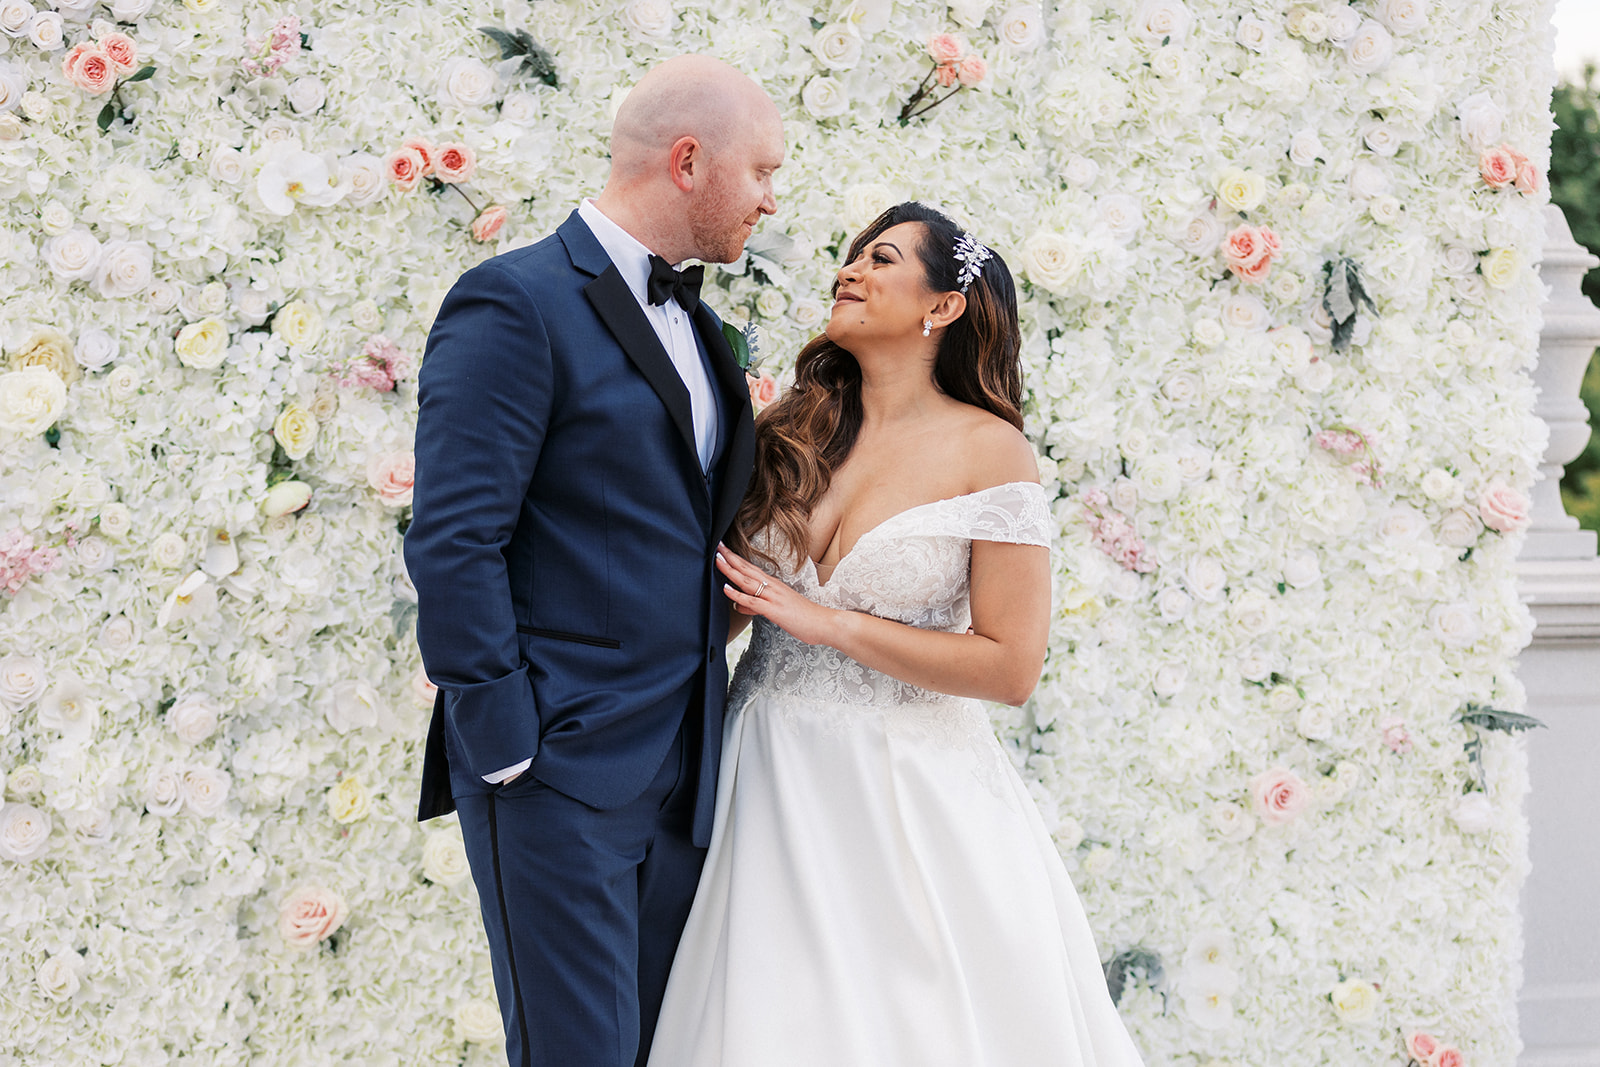 Newlyweds stand together smiling at each other in front of a wall of white and pink roses at their The Palace At Somerset Wedding